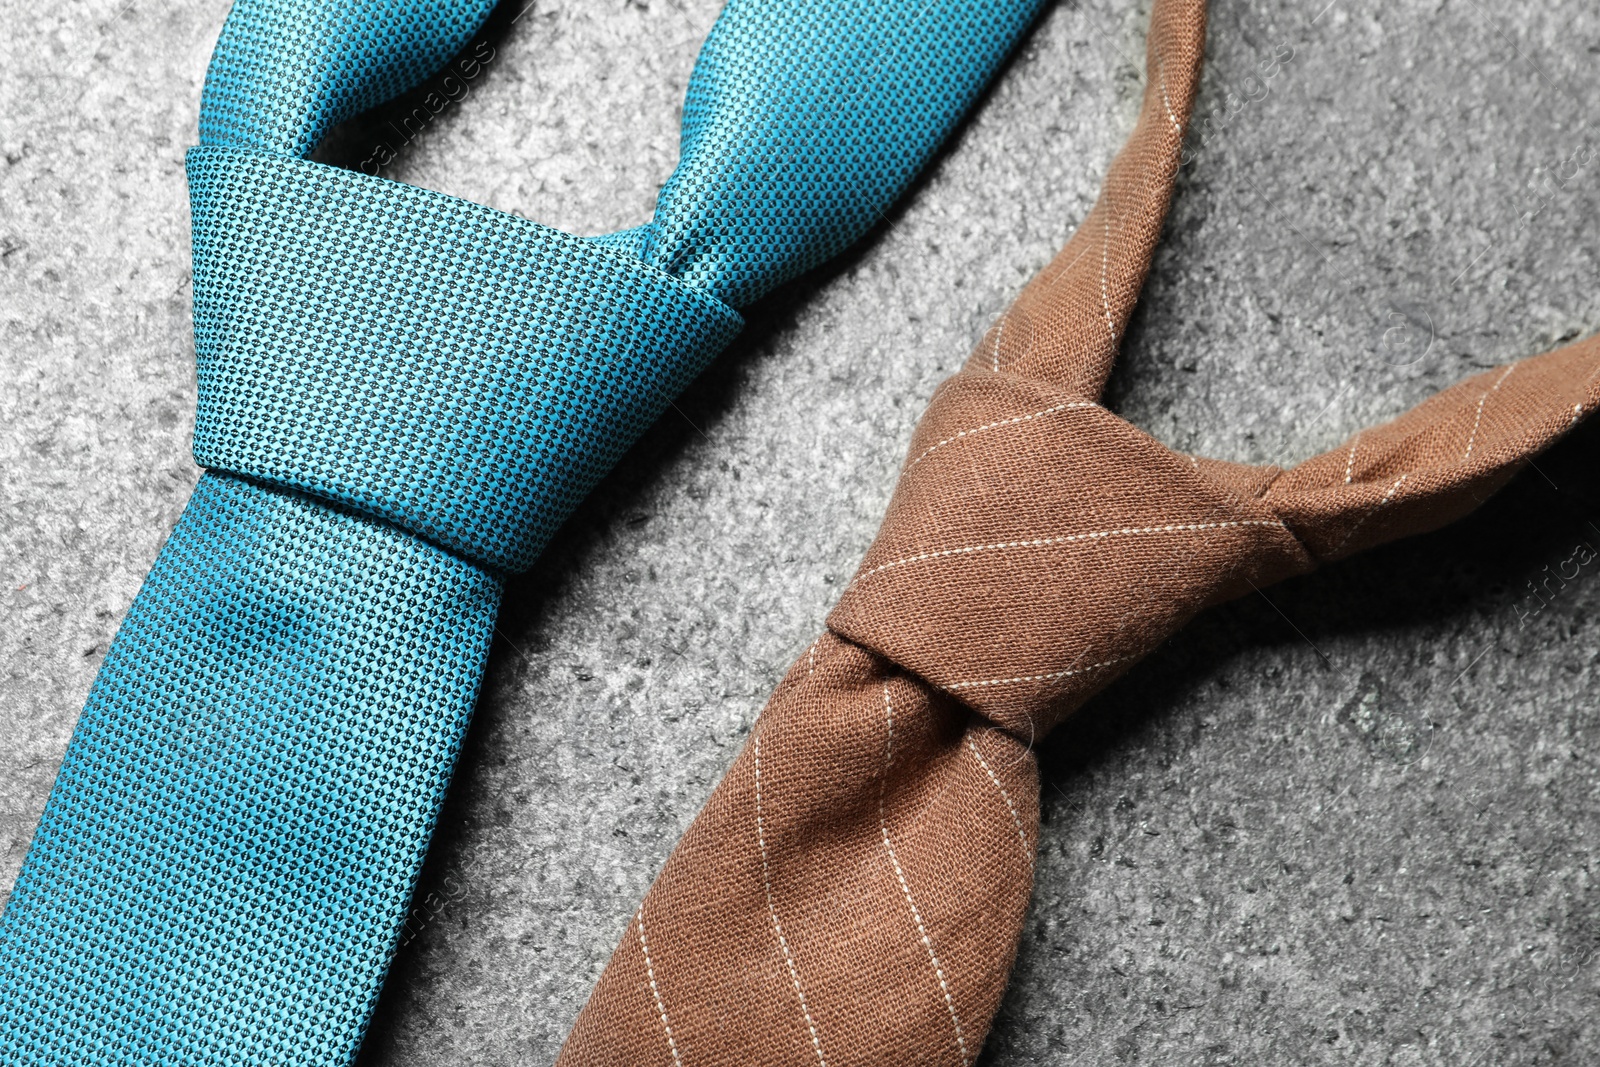 Photo of Two neckties on grey textured background, closeup